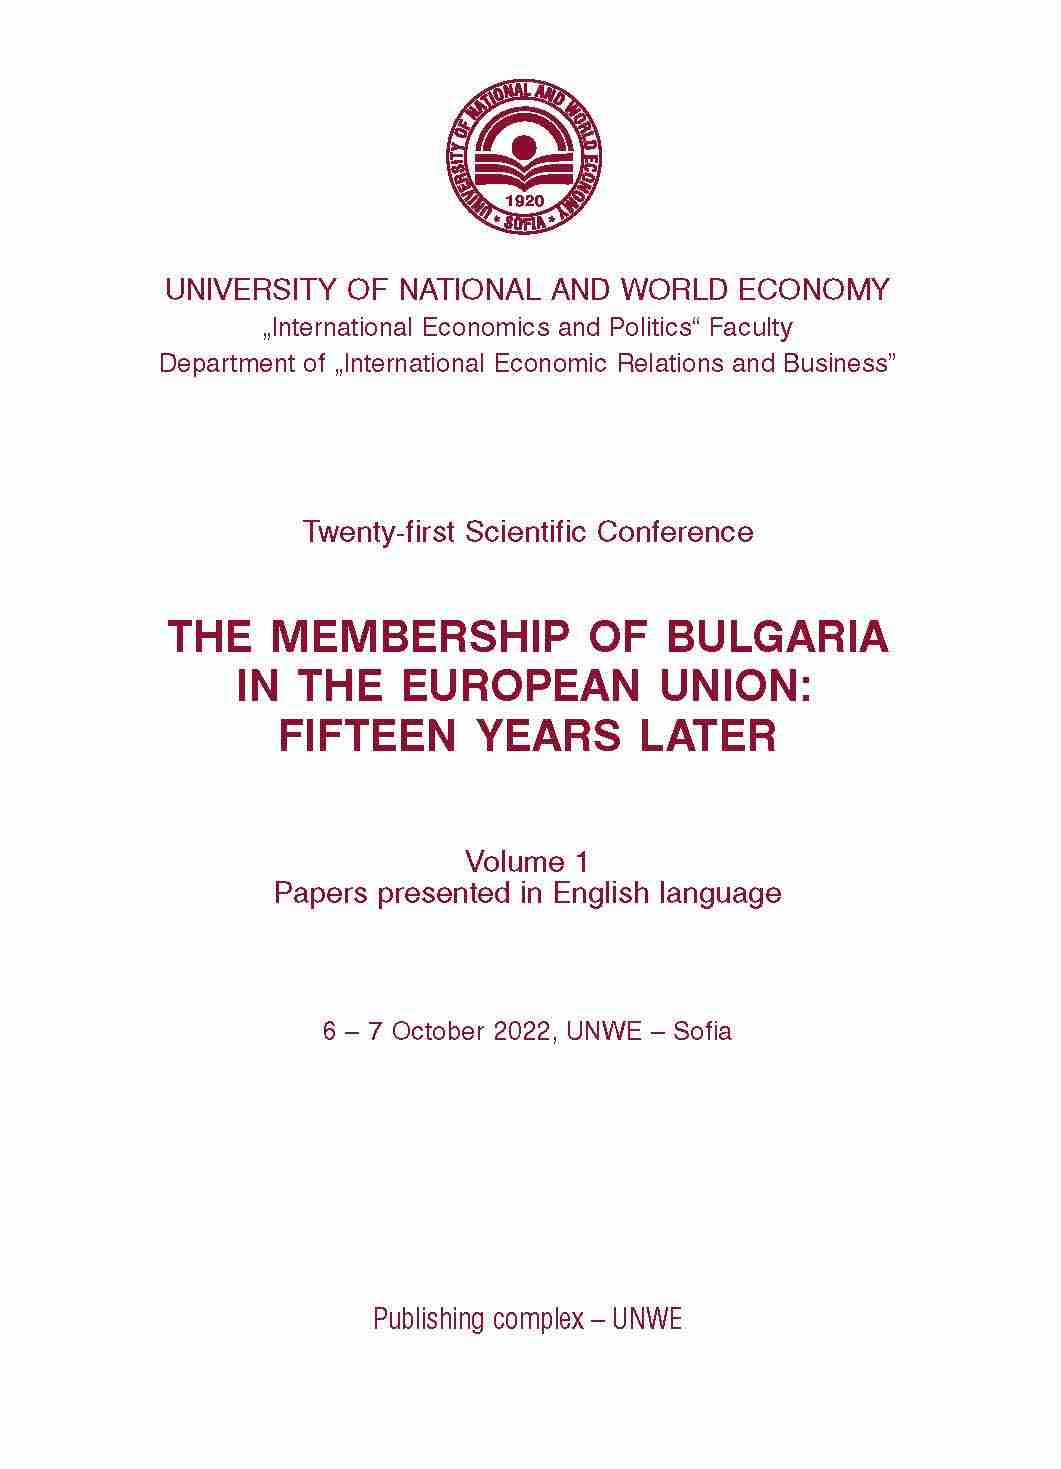 Bulgaria and the EU Convergence Reports from 2022